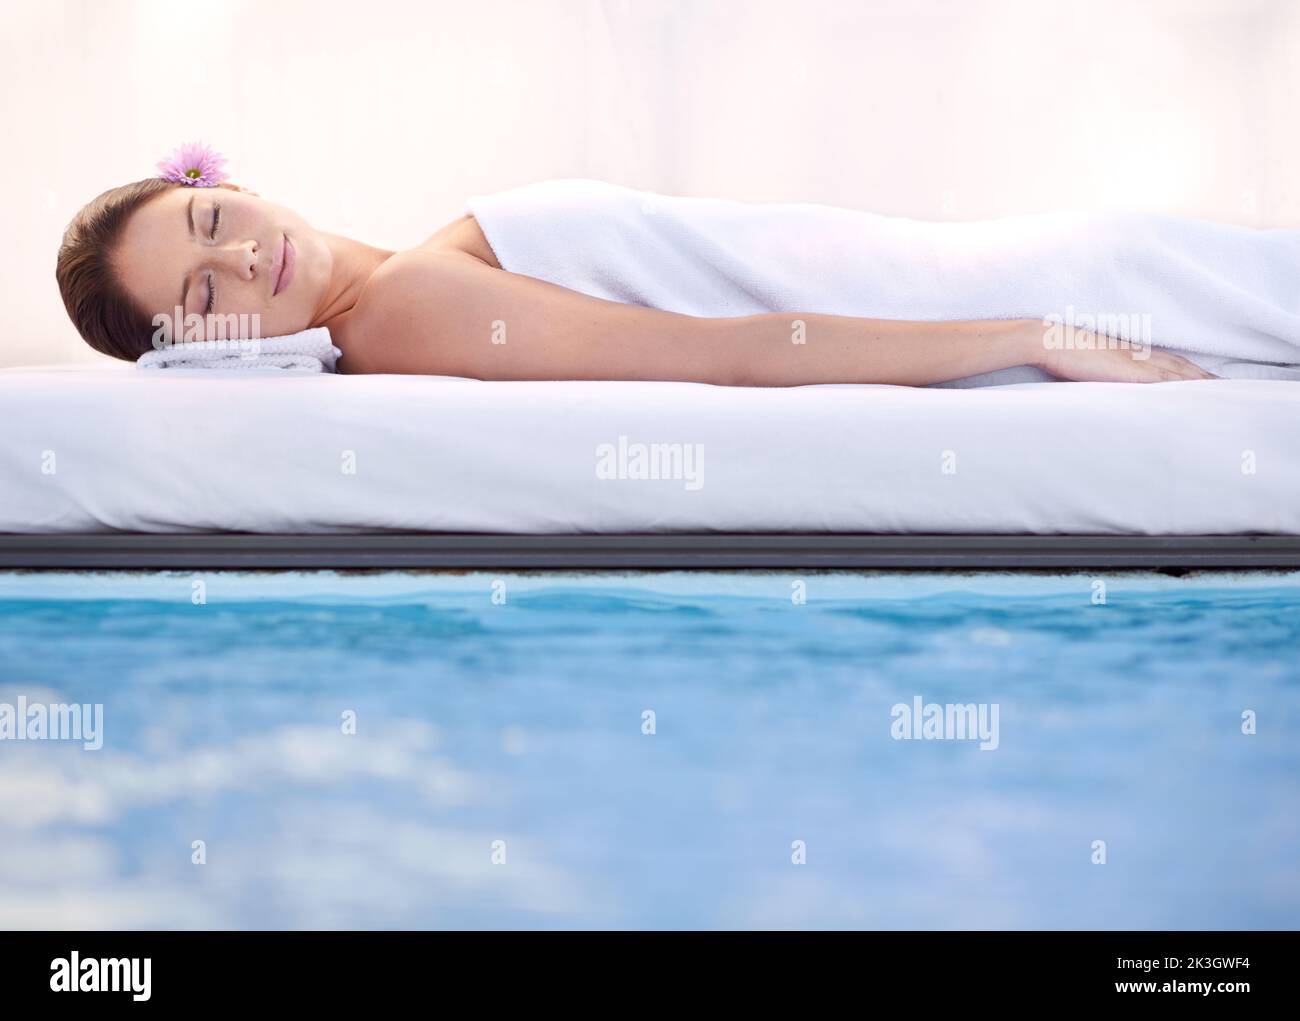 Life doesnt get better than this. a young woman relaxing by a pool at a spa. Stock Photo